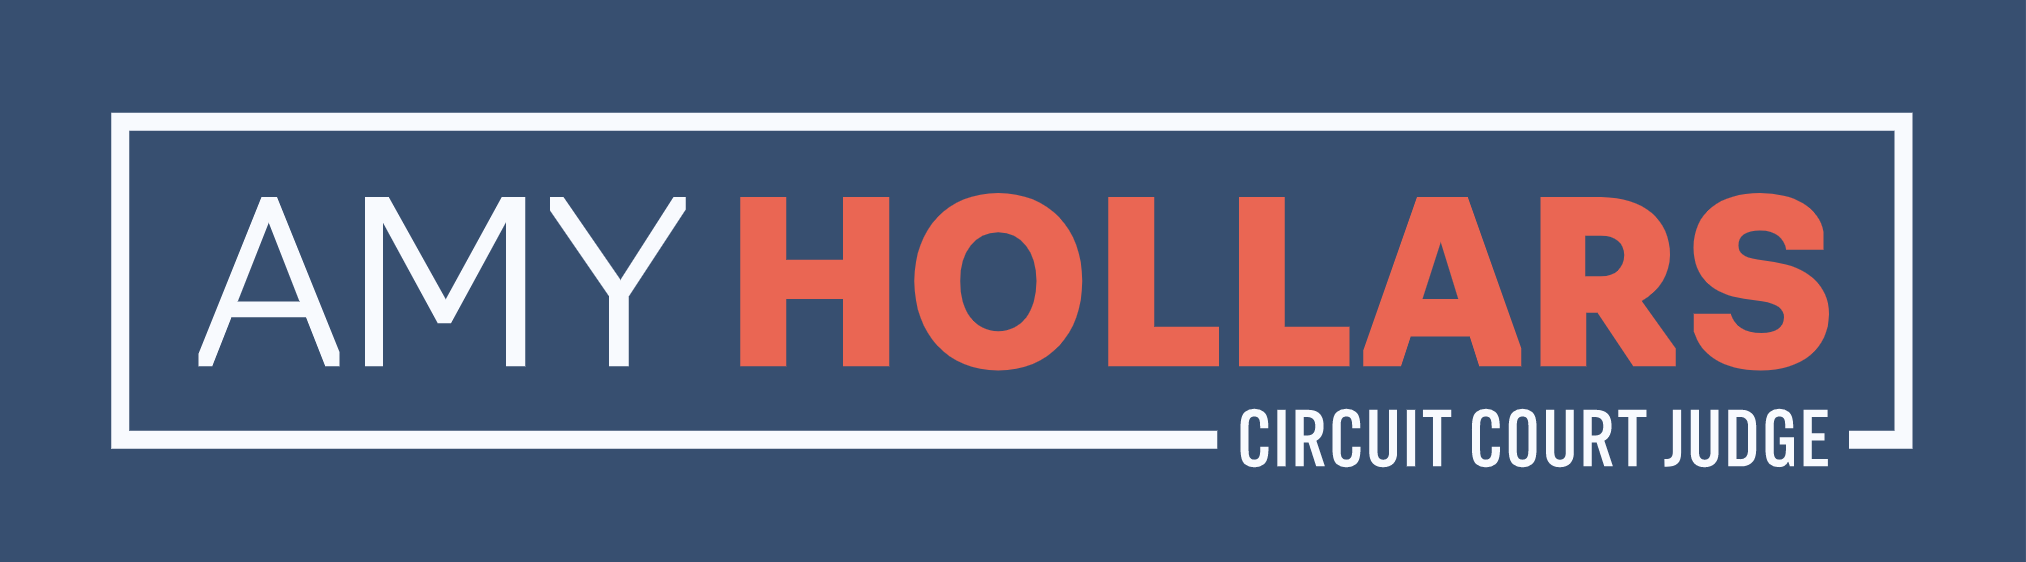 Committee to Re-Elect Judge Amy Hollars logo